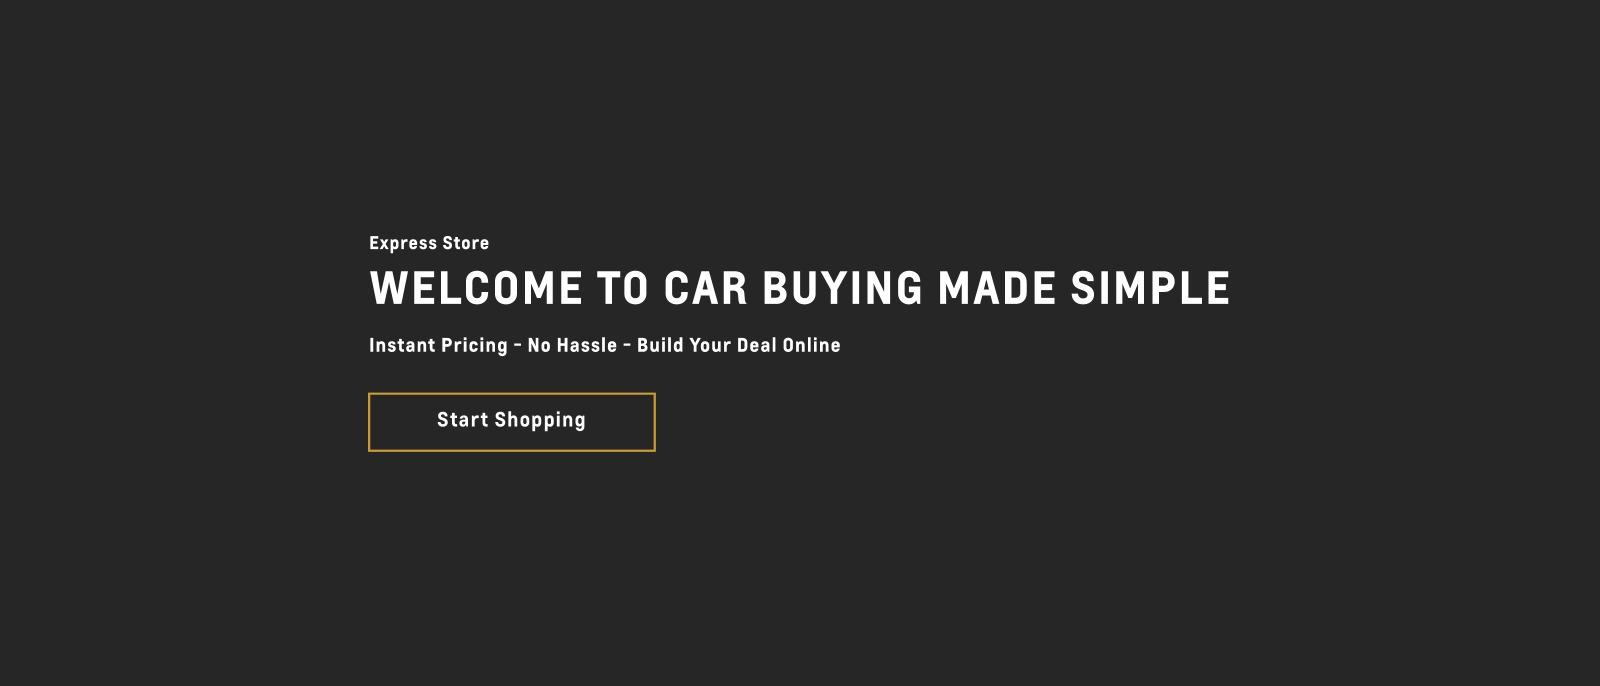 Express Store WELCOME TO CAR BUYING MADE SIMPLE